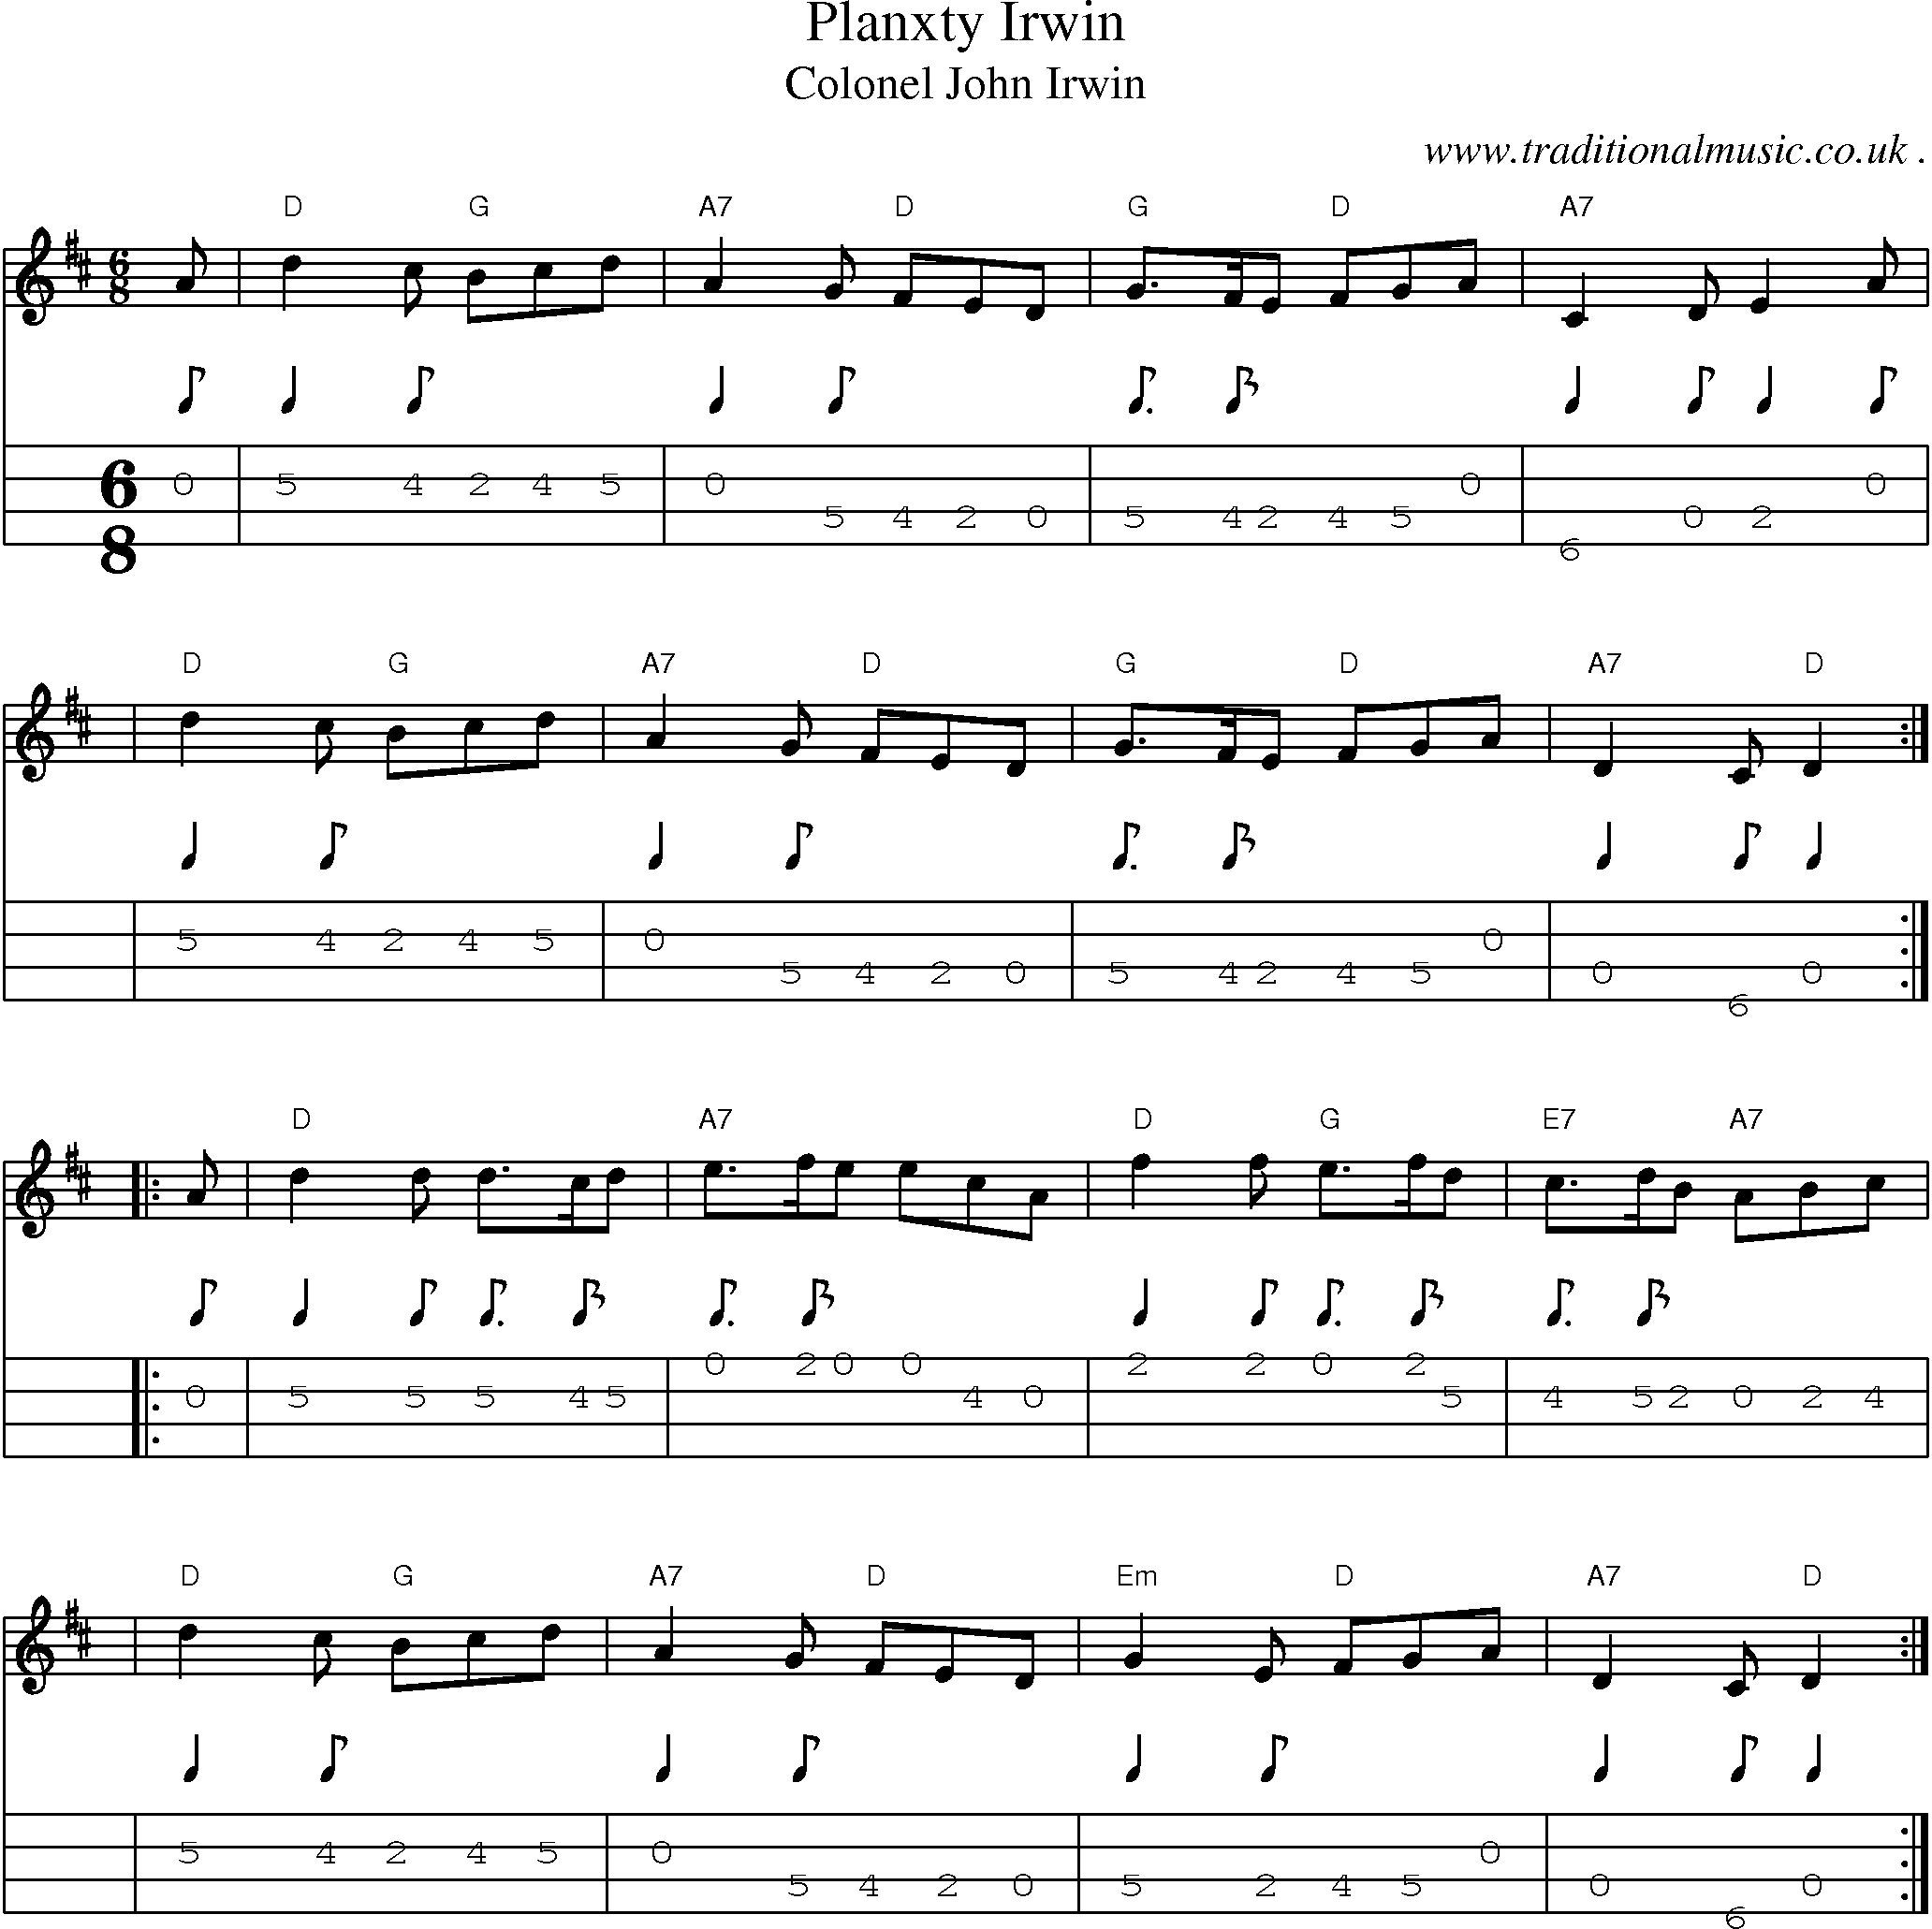 Sheet-music  score, Chords and Mandolin Tabs for Planxty Irwin